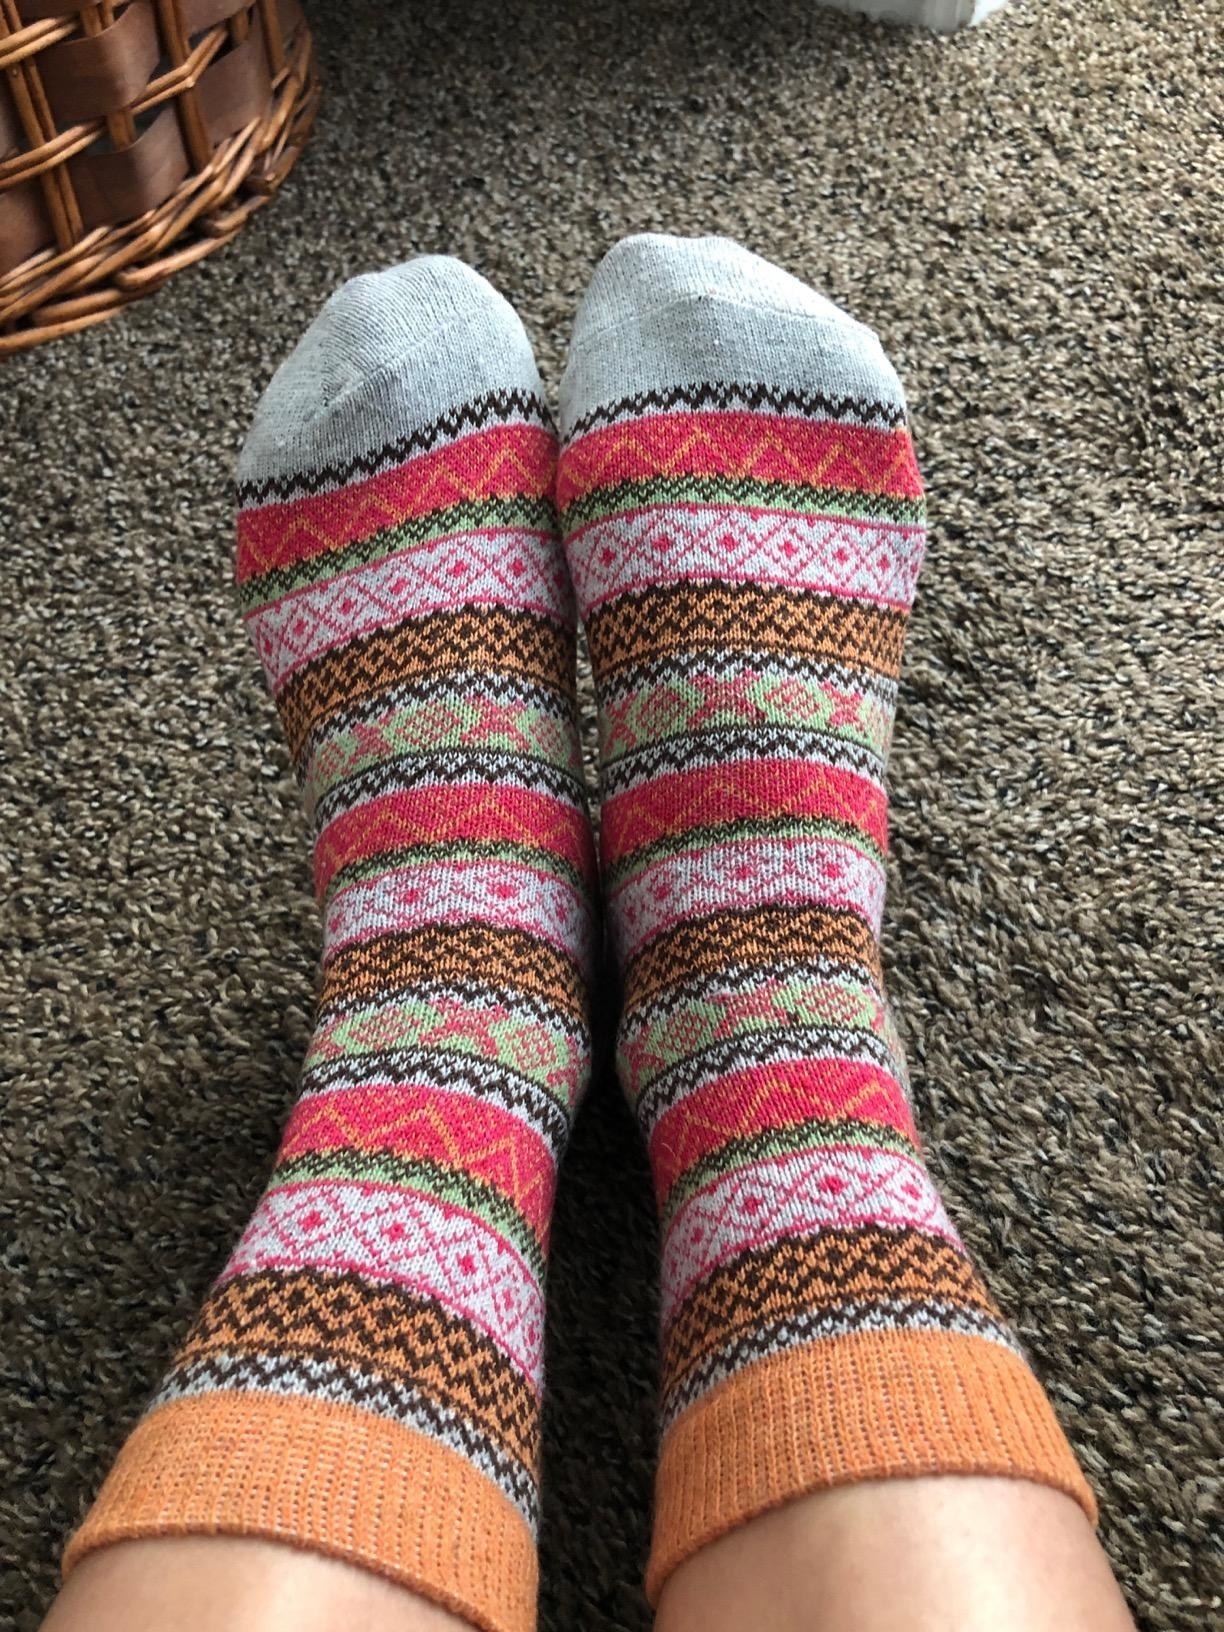 a reviewers printed colorful warm socks